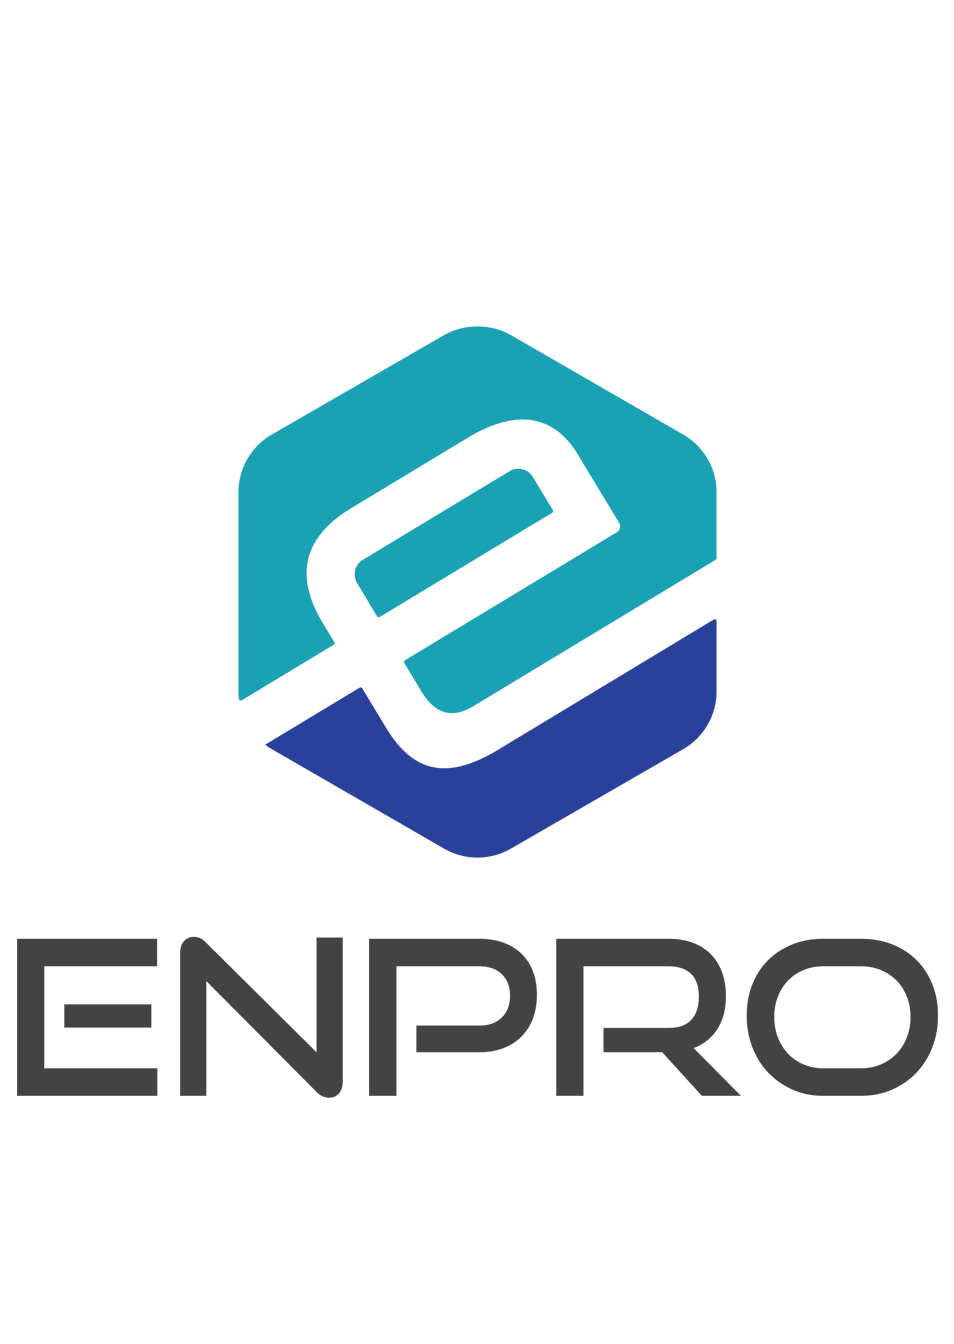 Enpro - Unleashing Material Science to move humanity forward